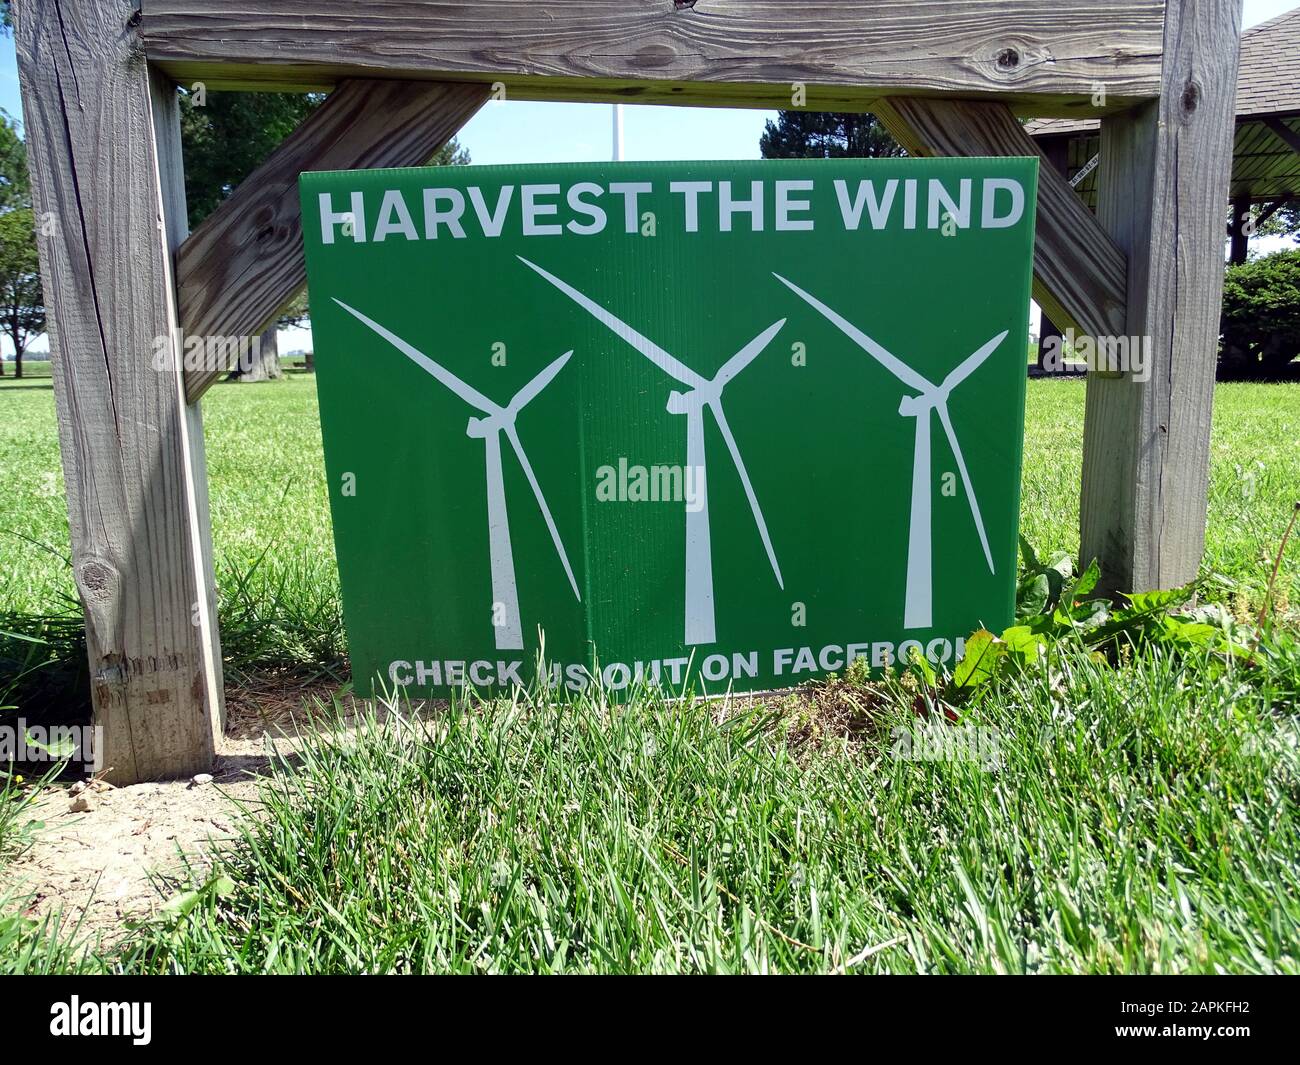 A sign showing three windmills adverting harvesting of the wind Stock Photo